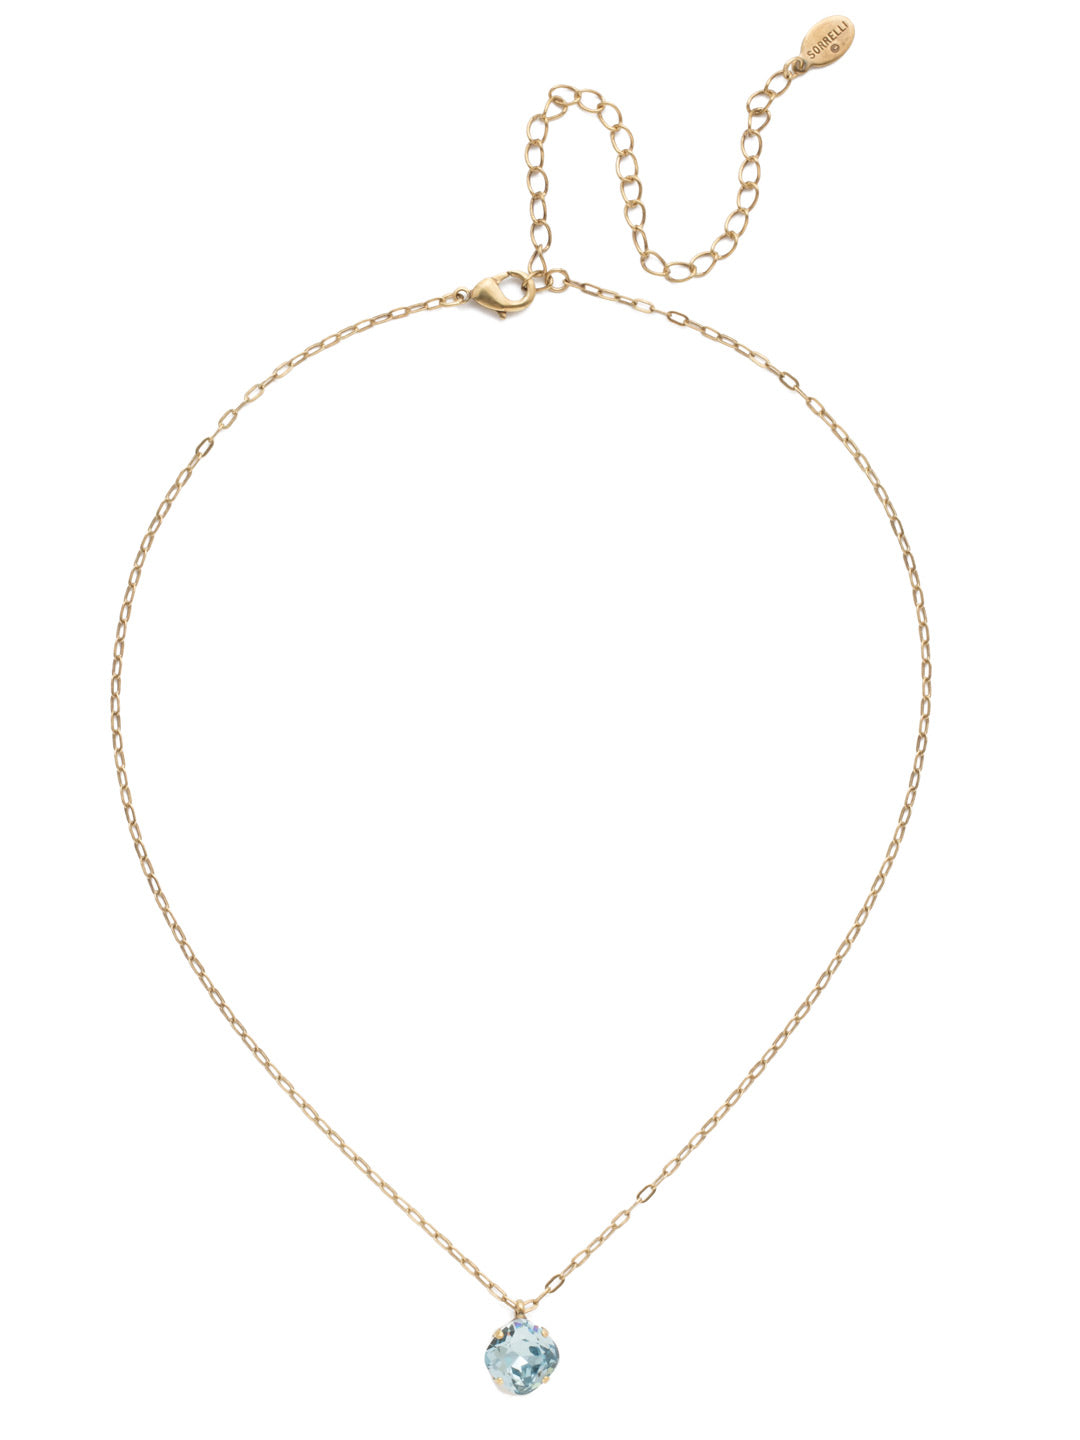 Siren Pendant Necklace - NEP22AGLAQ - <p>With a cushion-cut crystal and delicate chain, the Siren Pendant  will add a litle sparkle to your everyday look. From Sorrelli's Light Aqua collection in our Antique Gold-tone finish.</p>